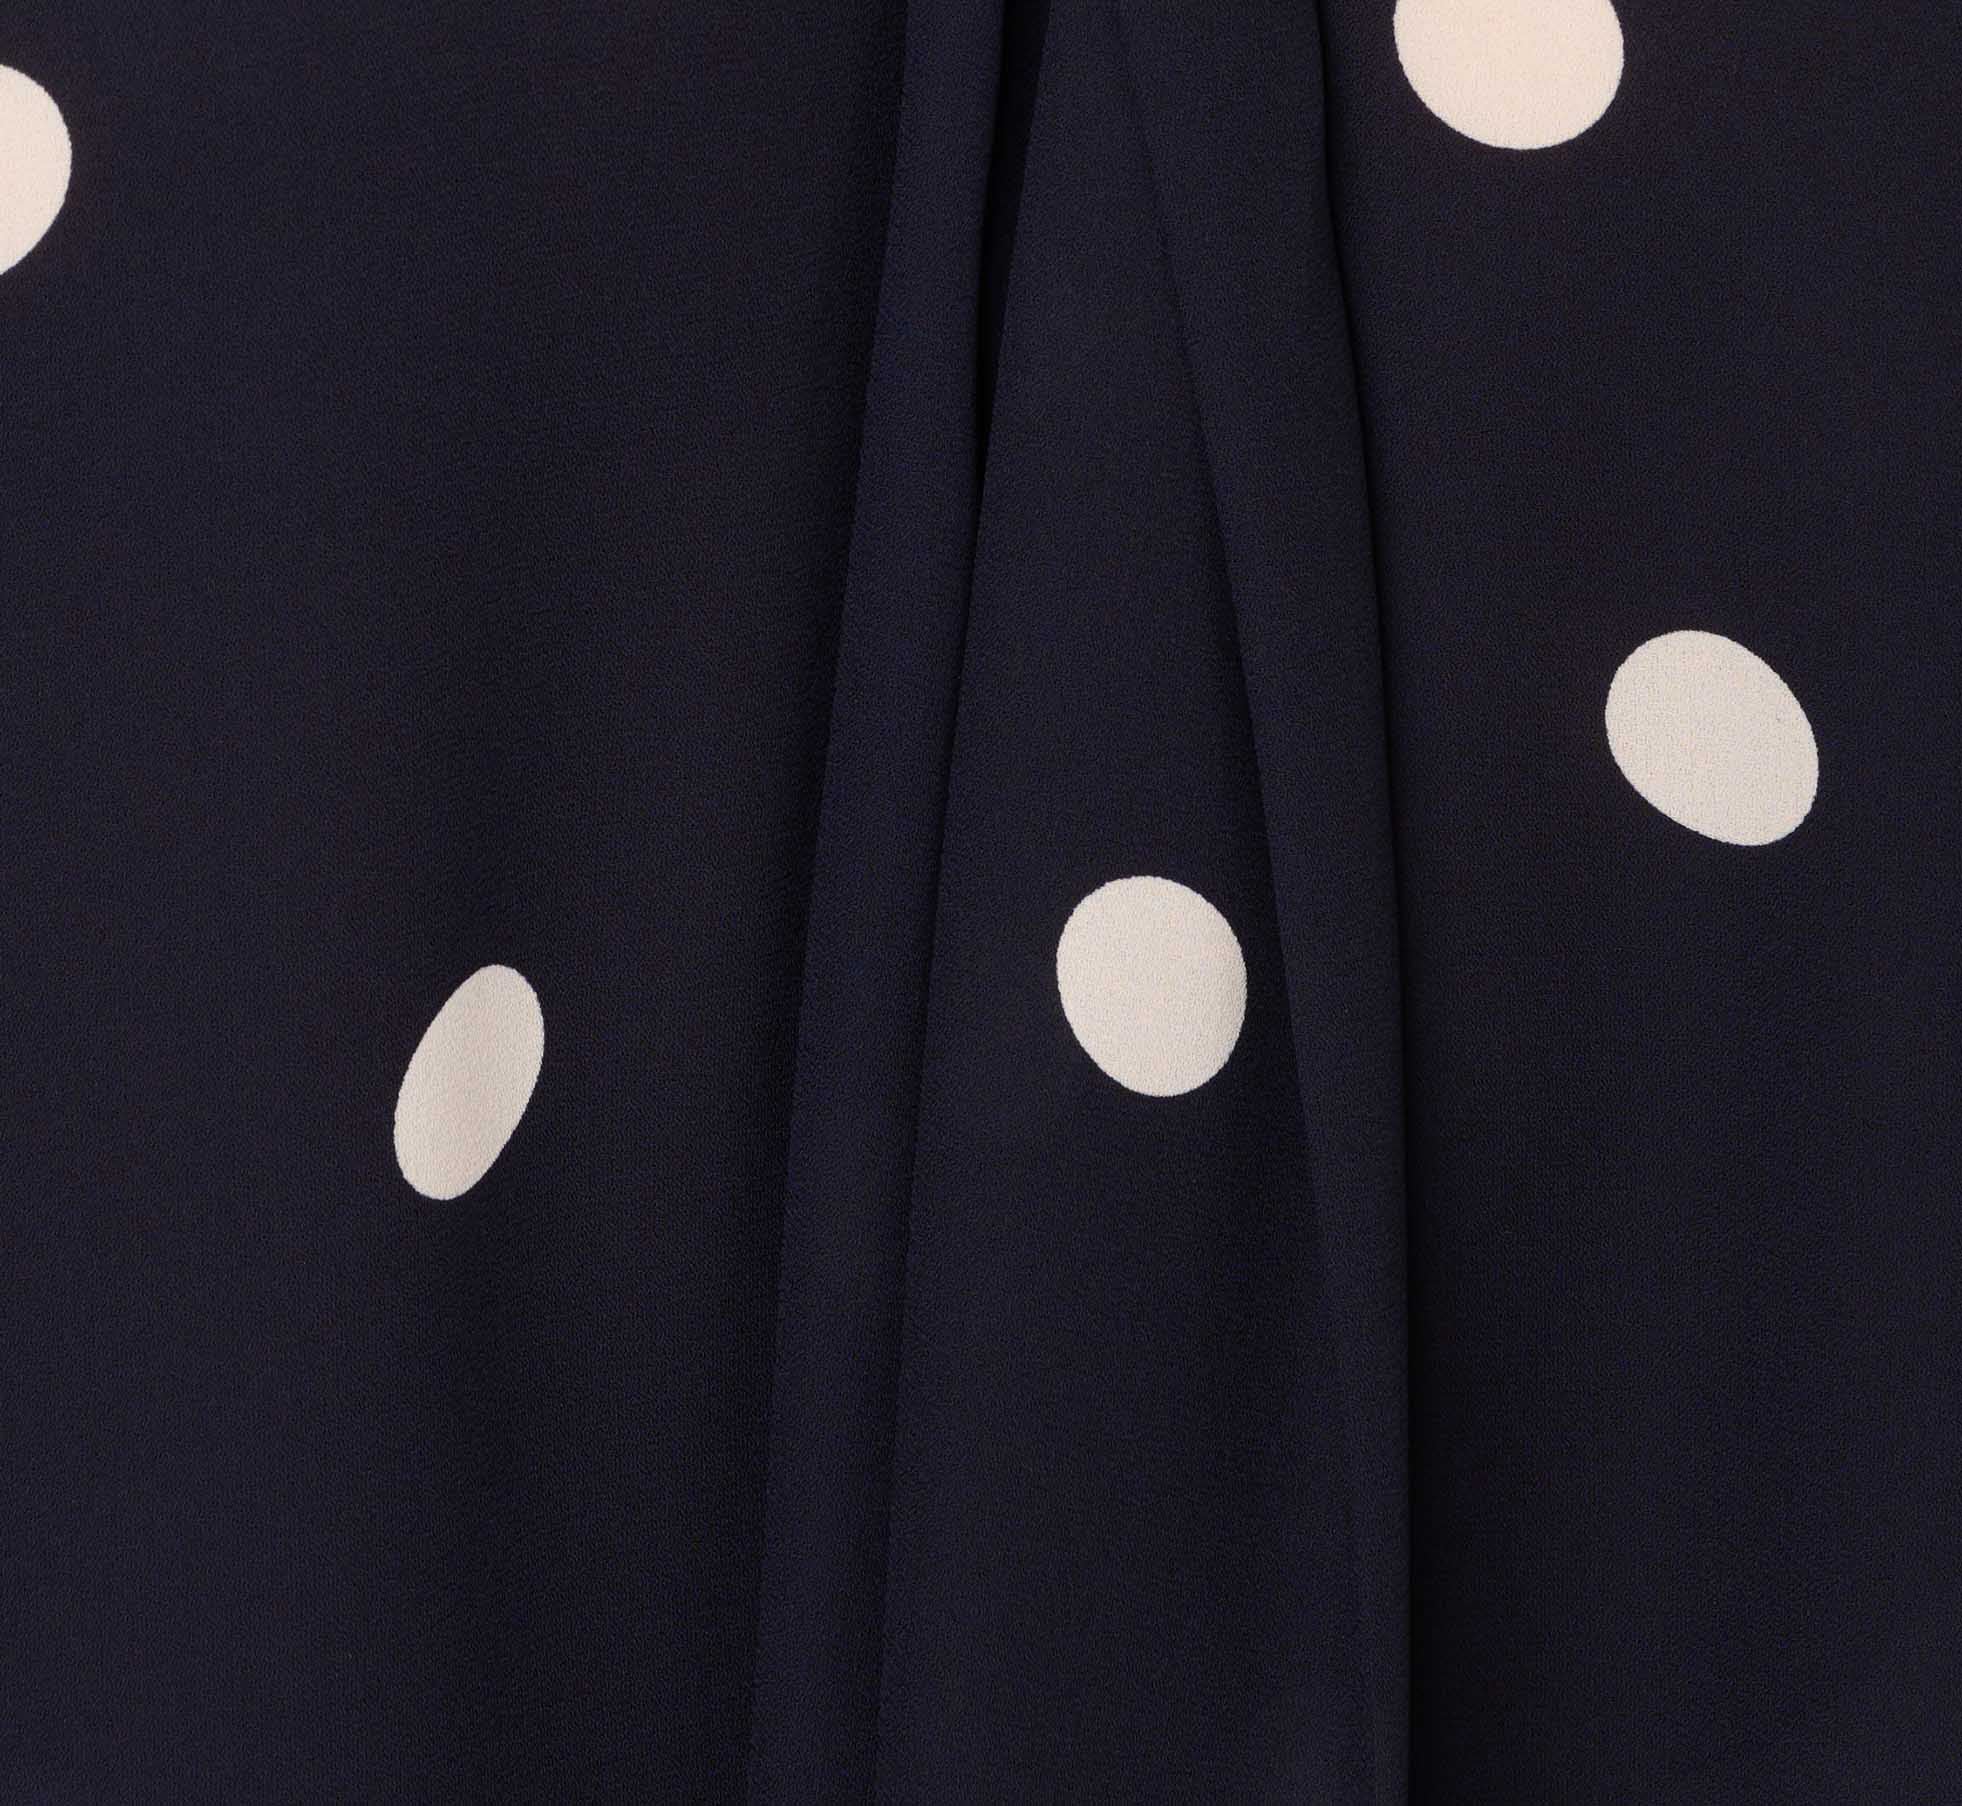 Dot Printed Short Sleeve Top With Bow Neckline In Navy Ivory Large